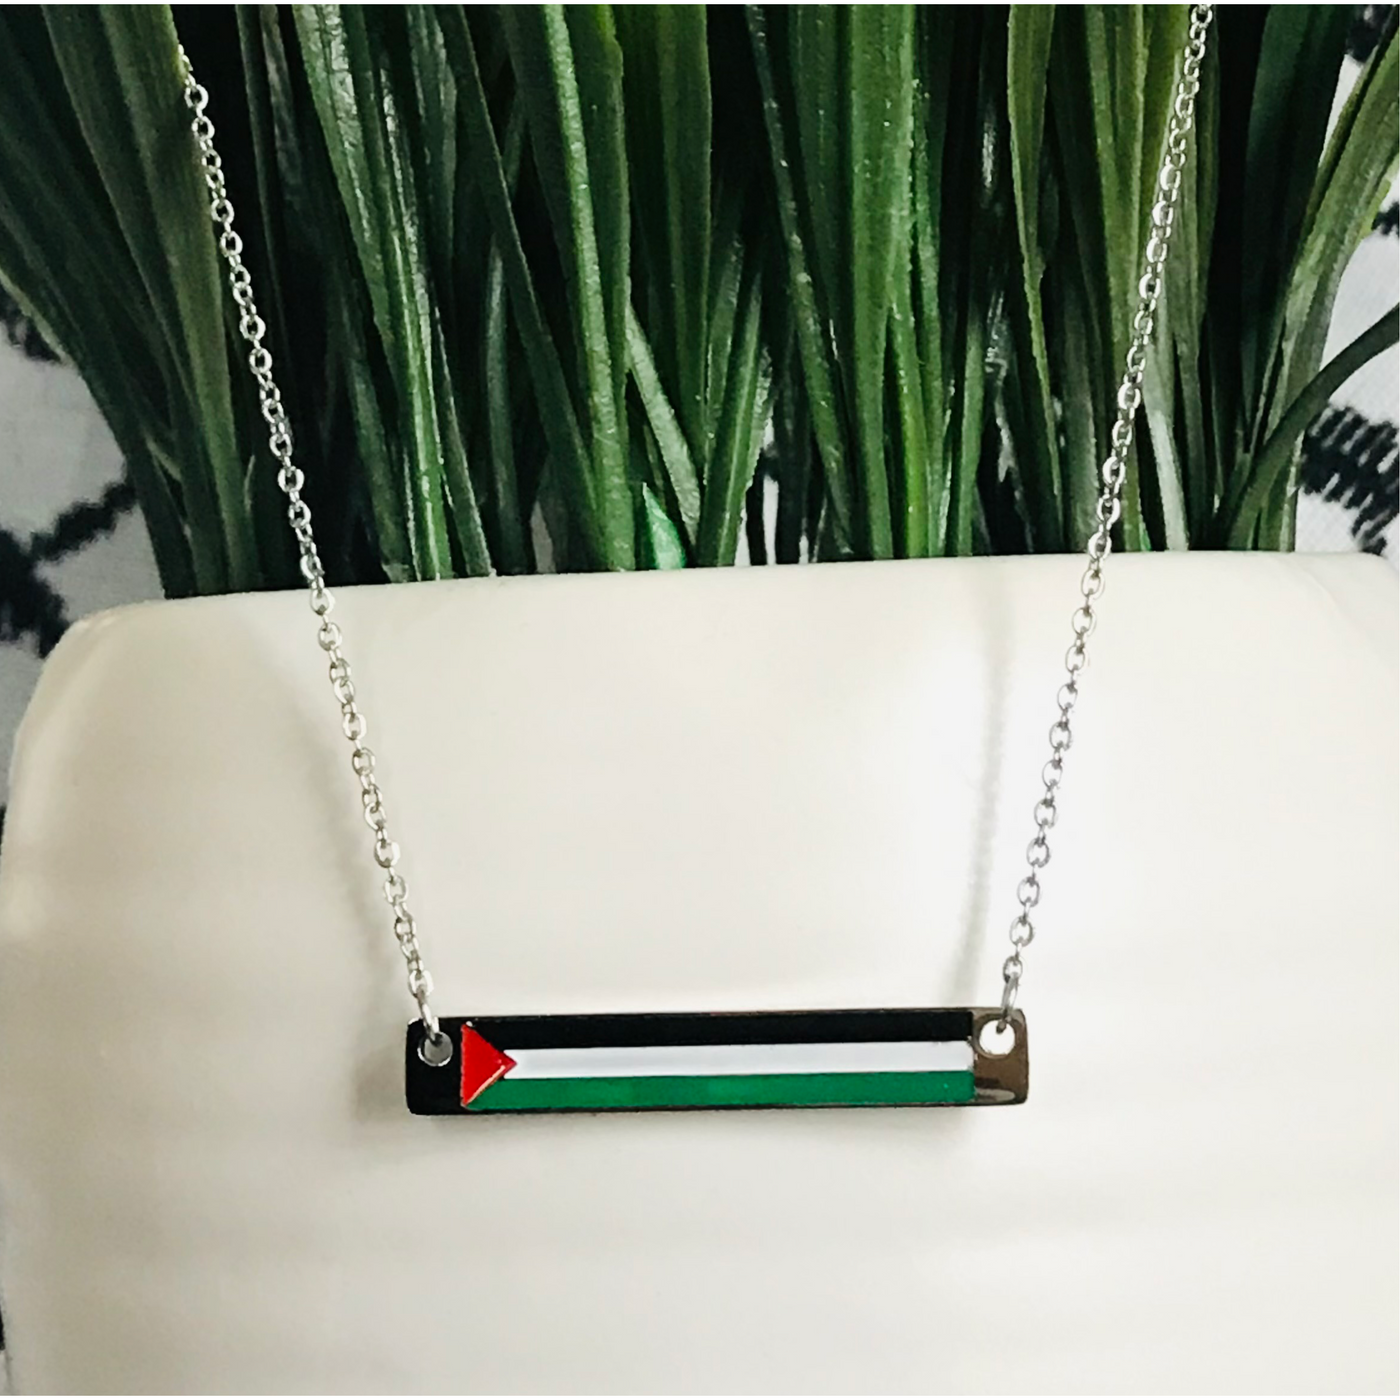 The Palestinian Flag Bar Necklace